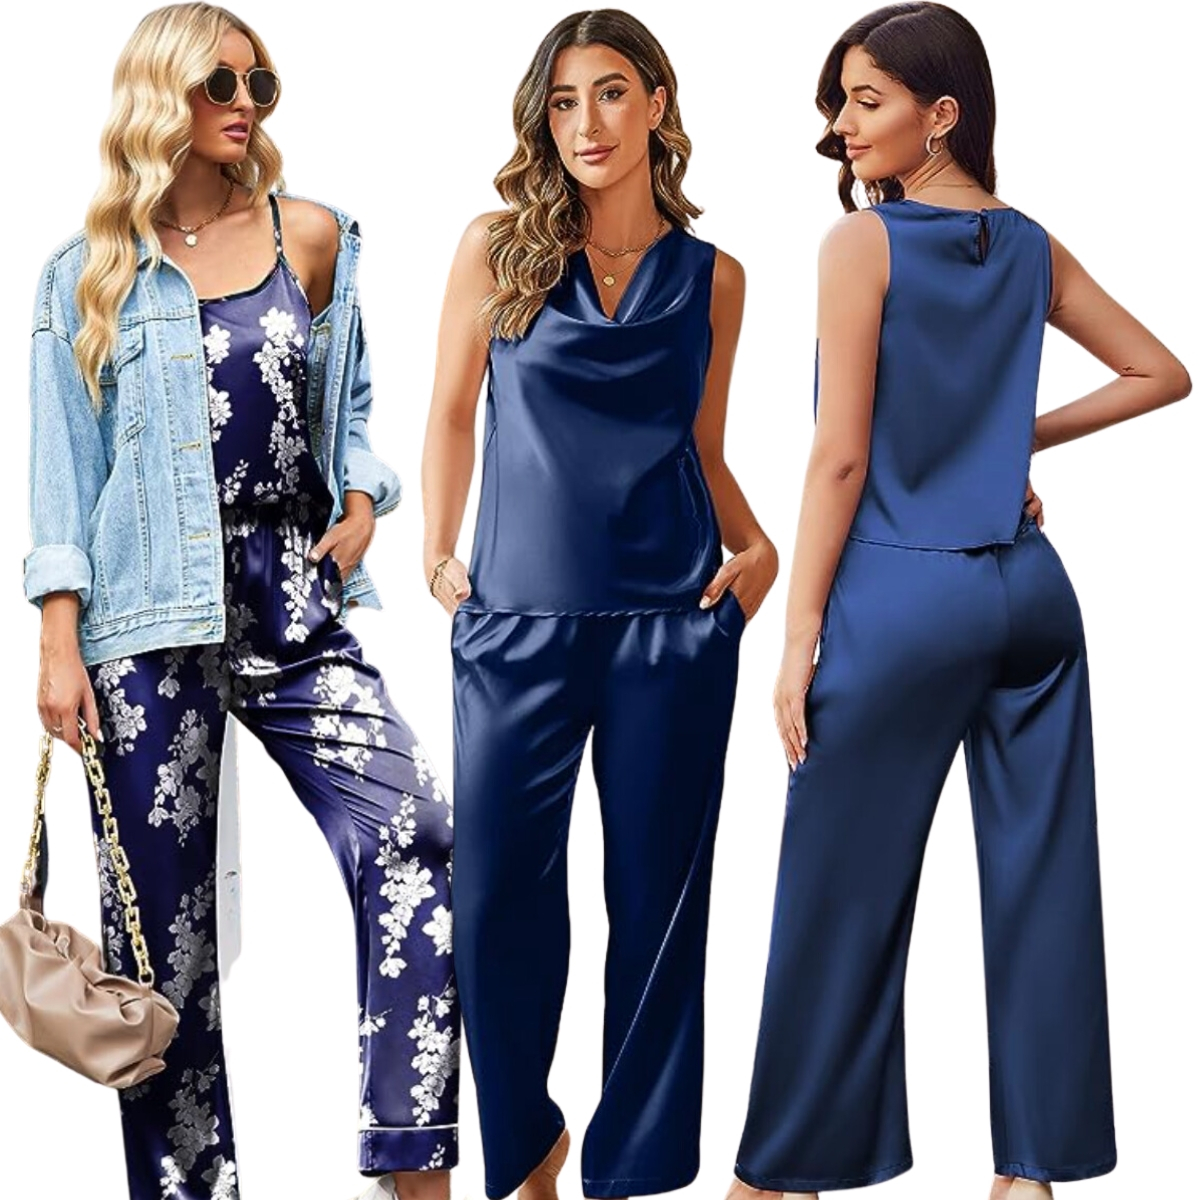 Buy Pajama Party Outfit For Women online